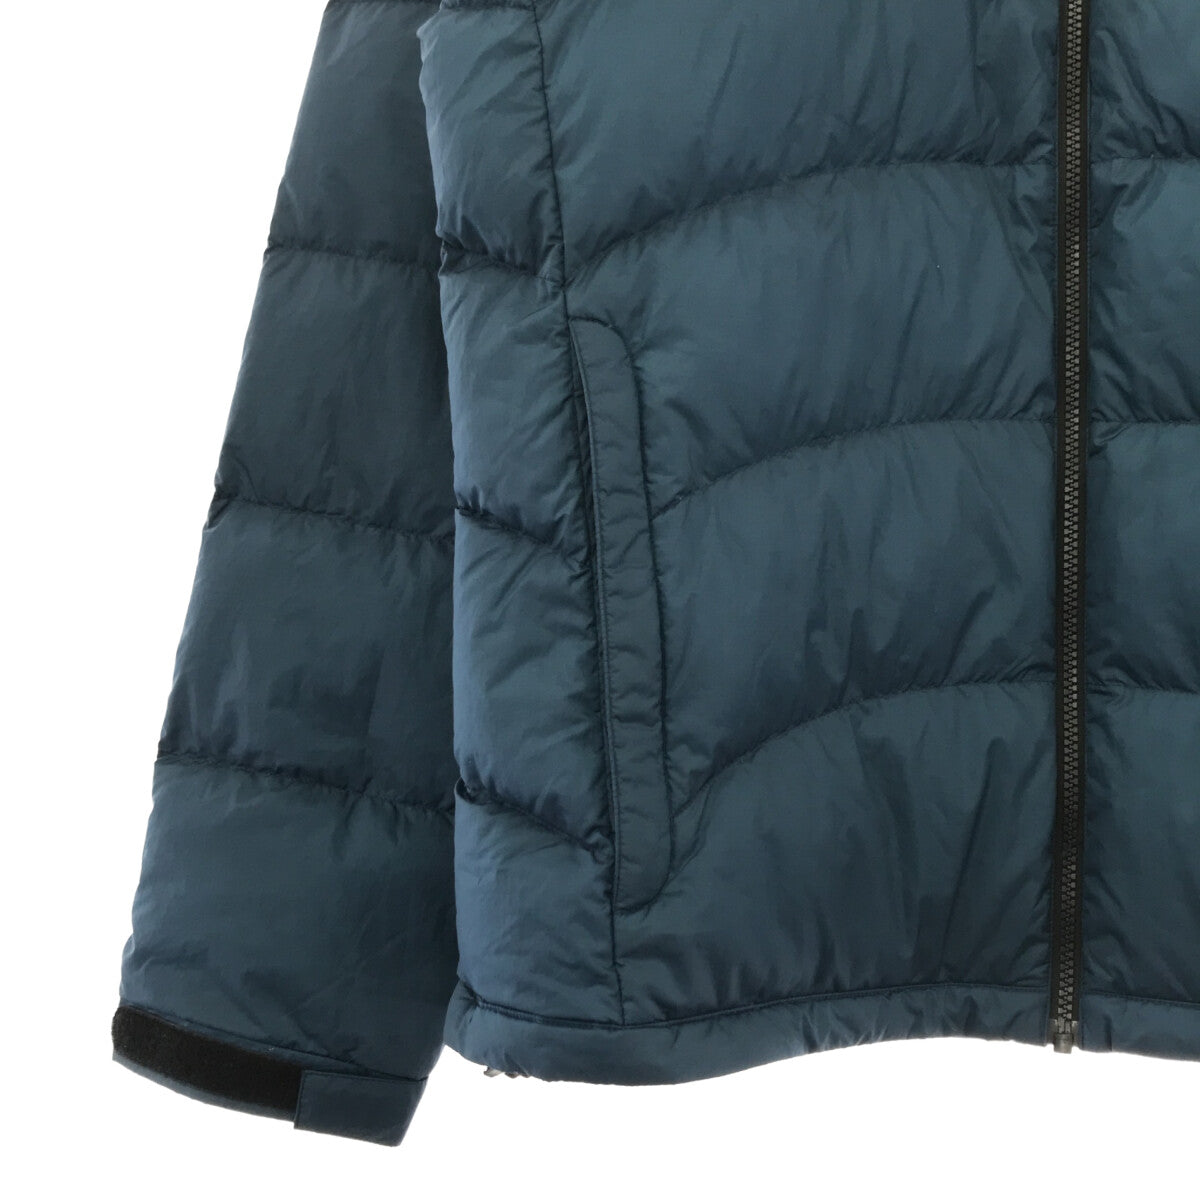 THE NORTH FACE / ザノースフェイス | Aconcagua Jacket / ND91832 